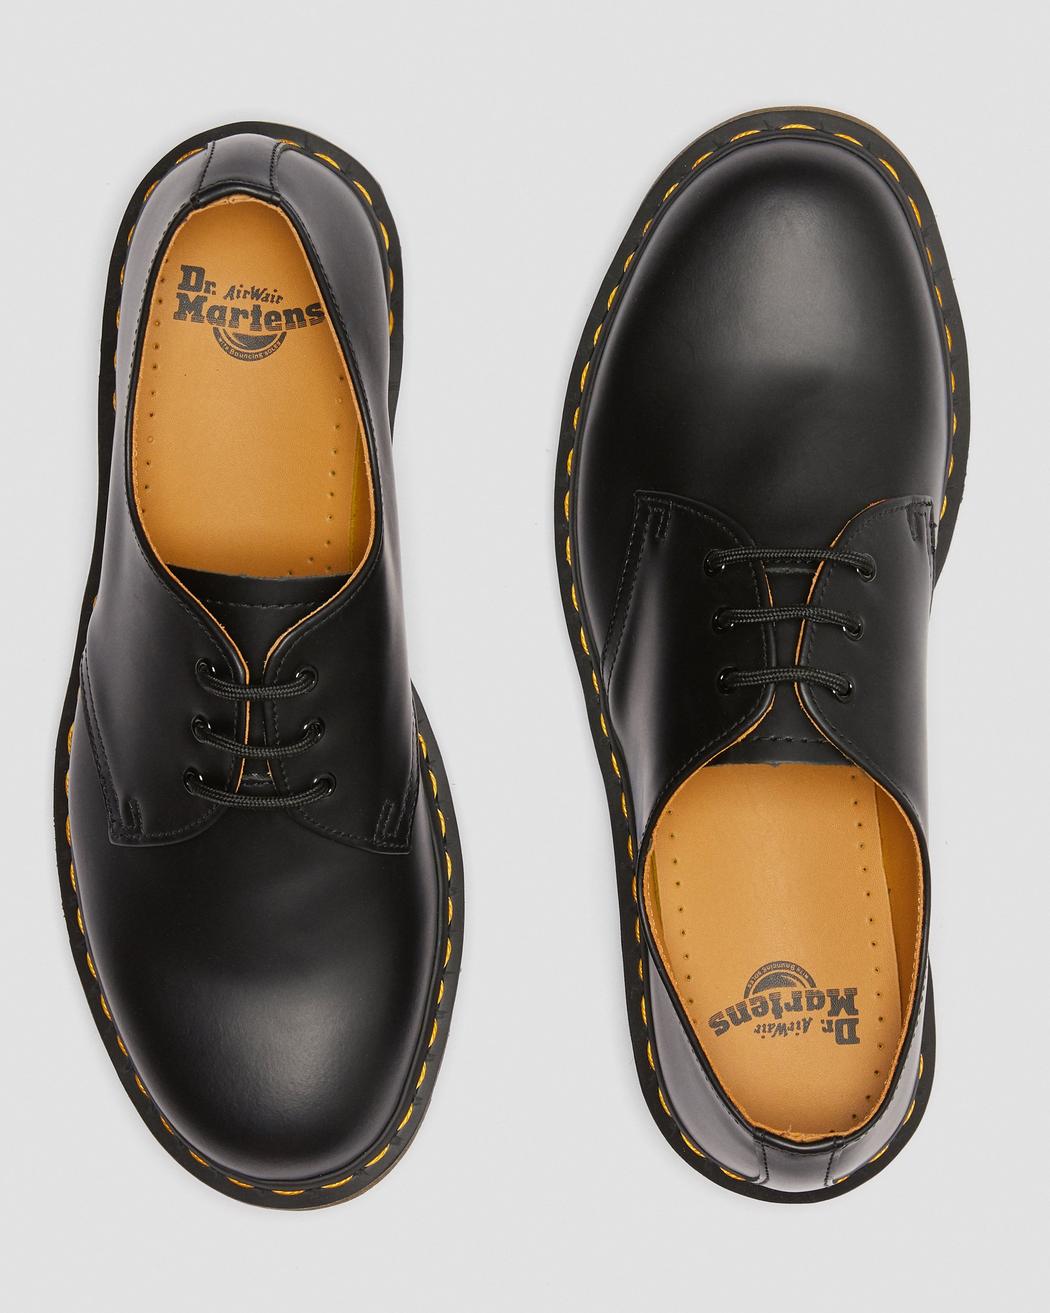 DR MARTENS 1461 SMOOTH LEATHER SHOES - BLACK SMOOTH